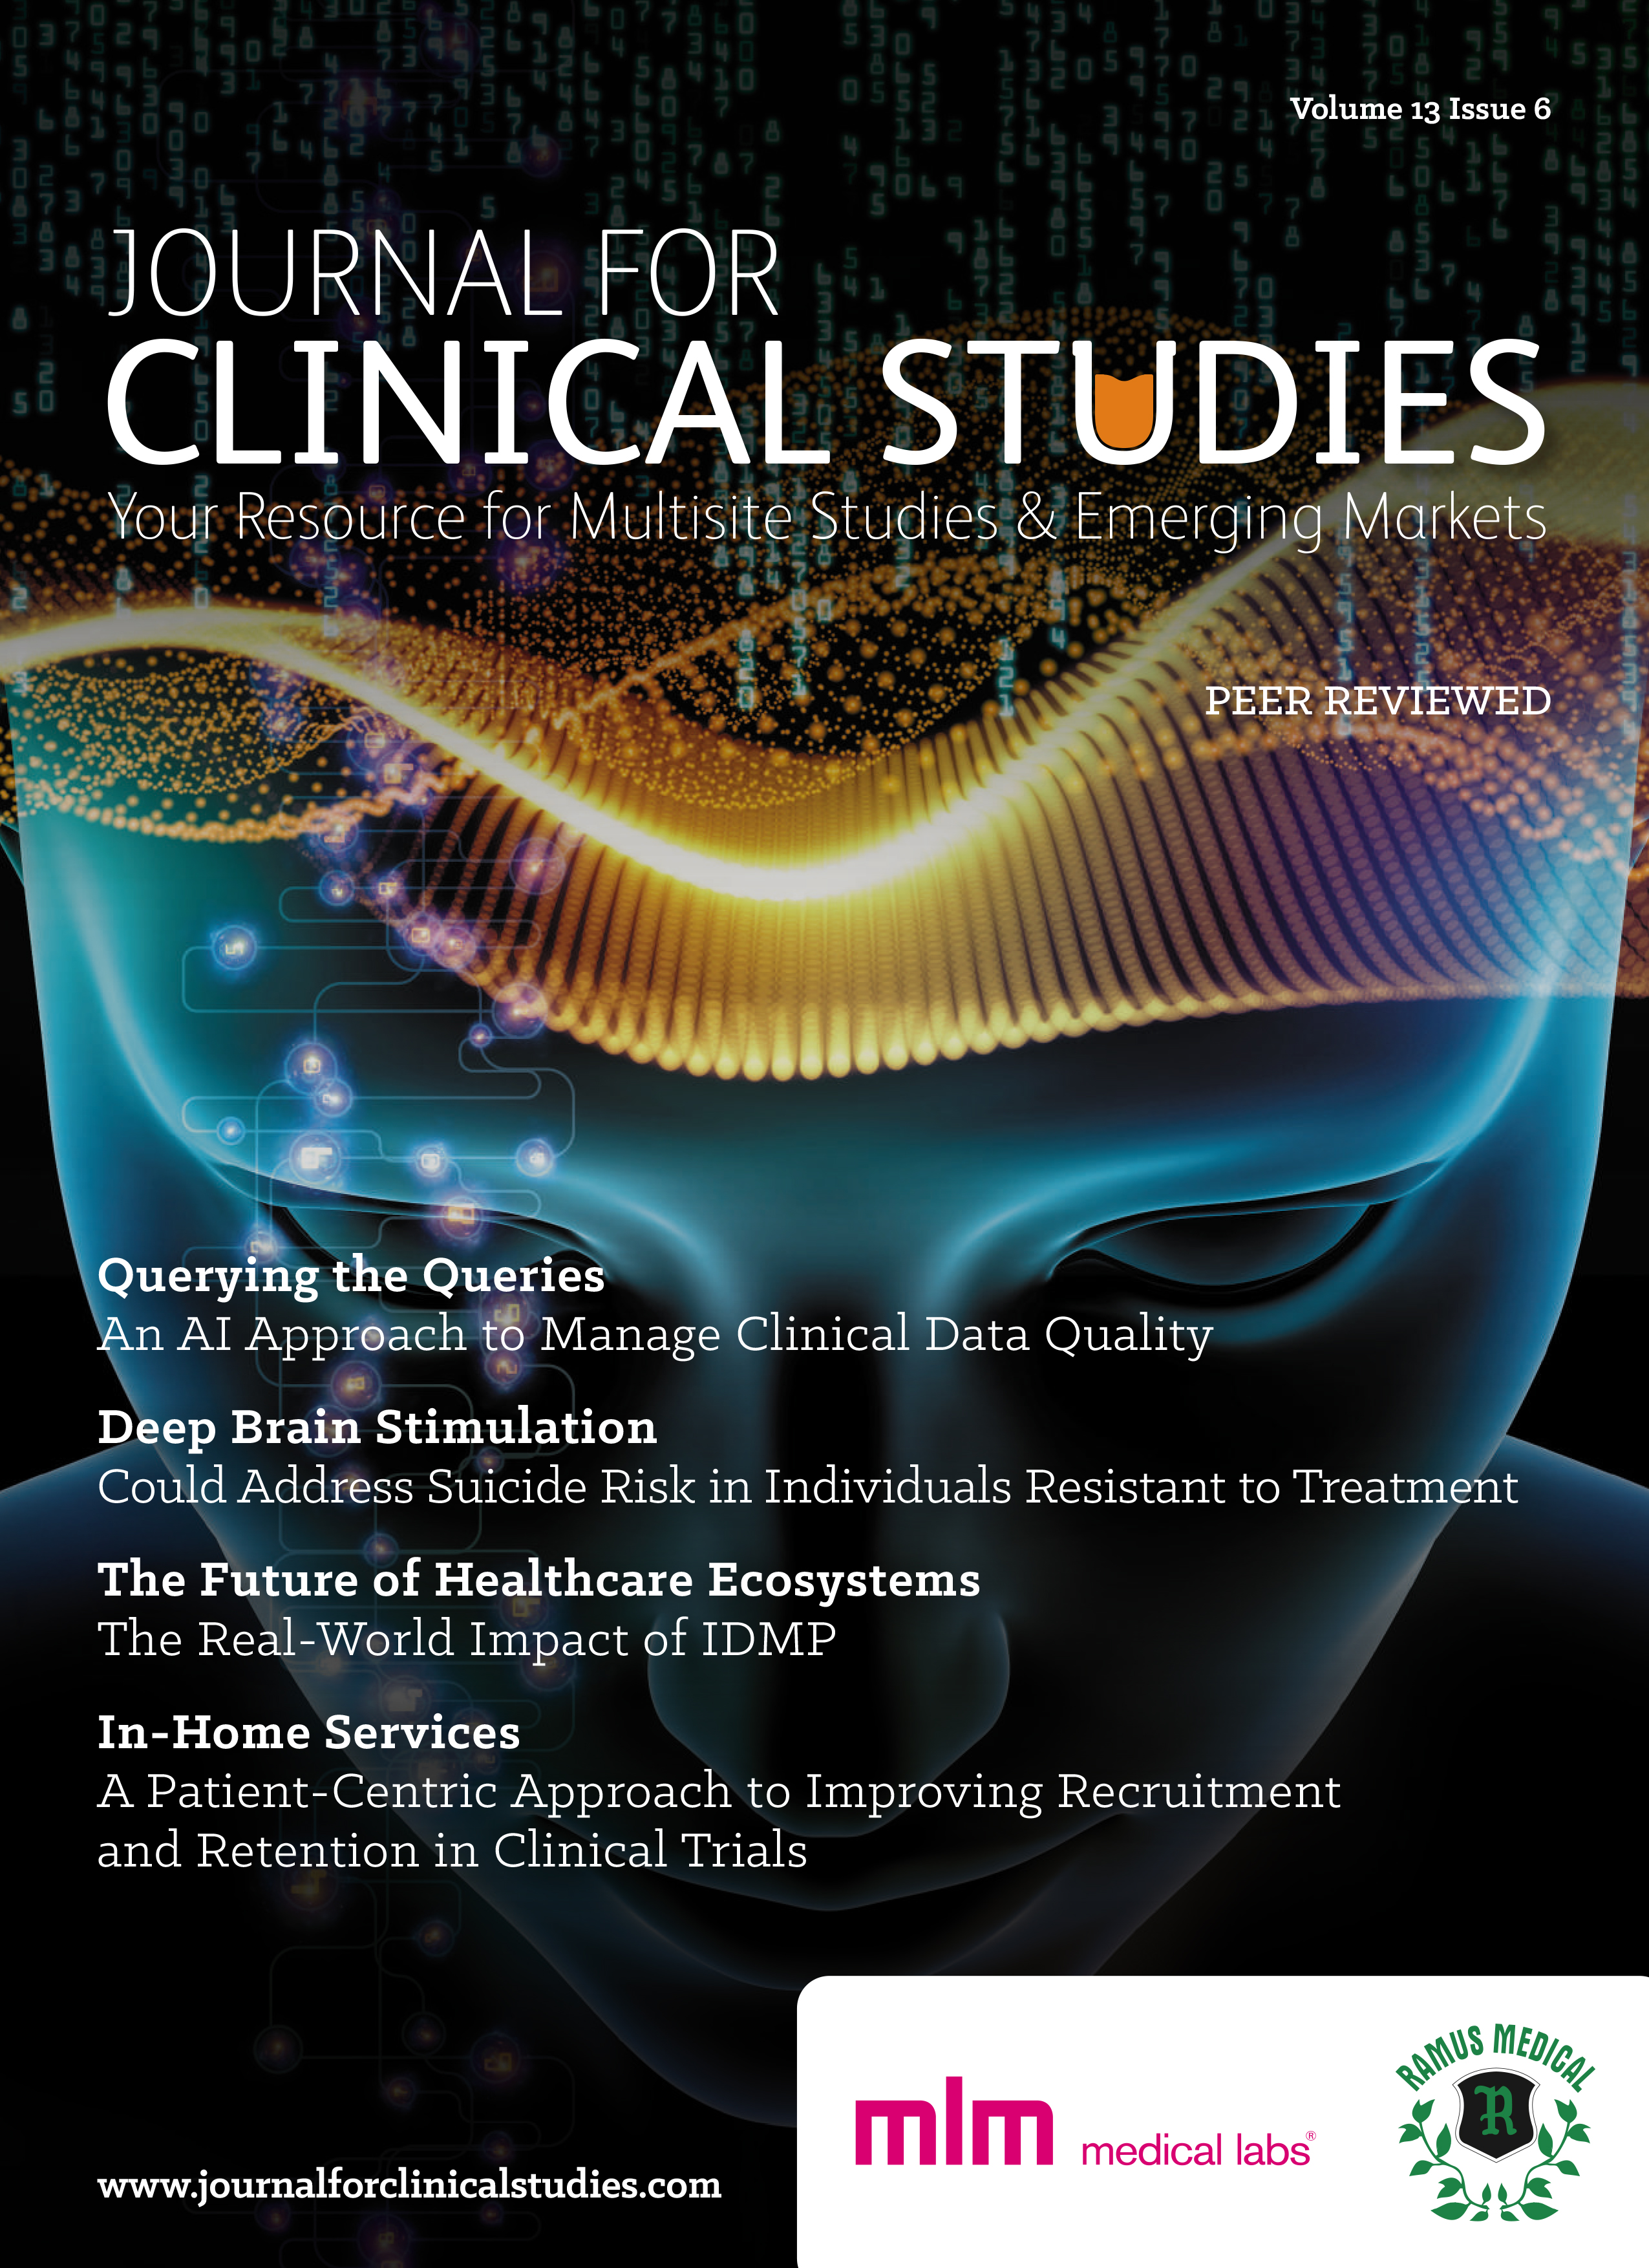 Clinerion article: Health Outcomes in Clinical Trials (Journal for Clinical Studies)